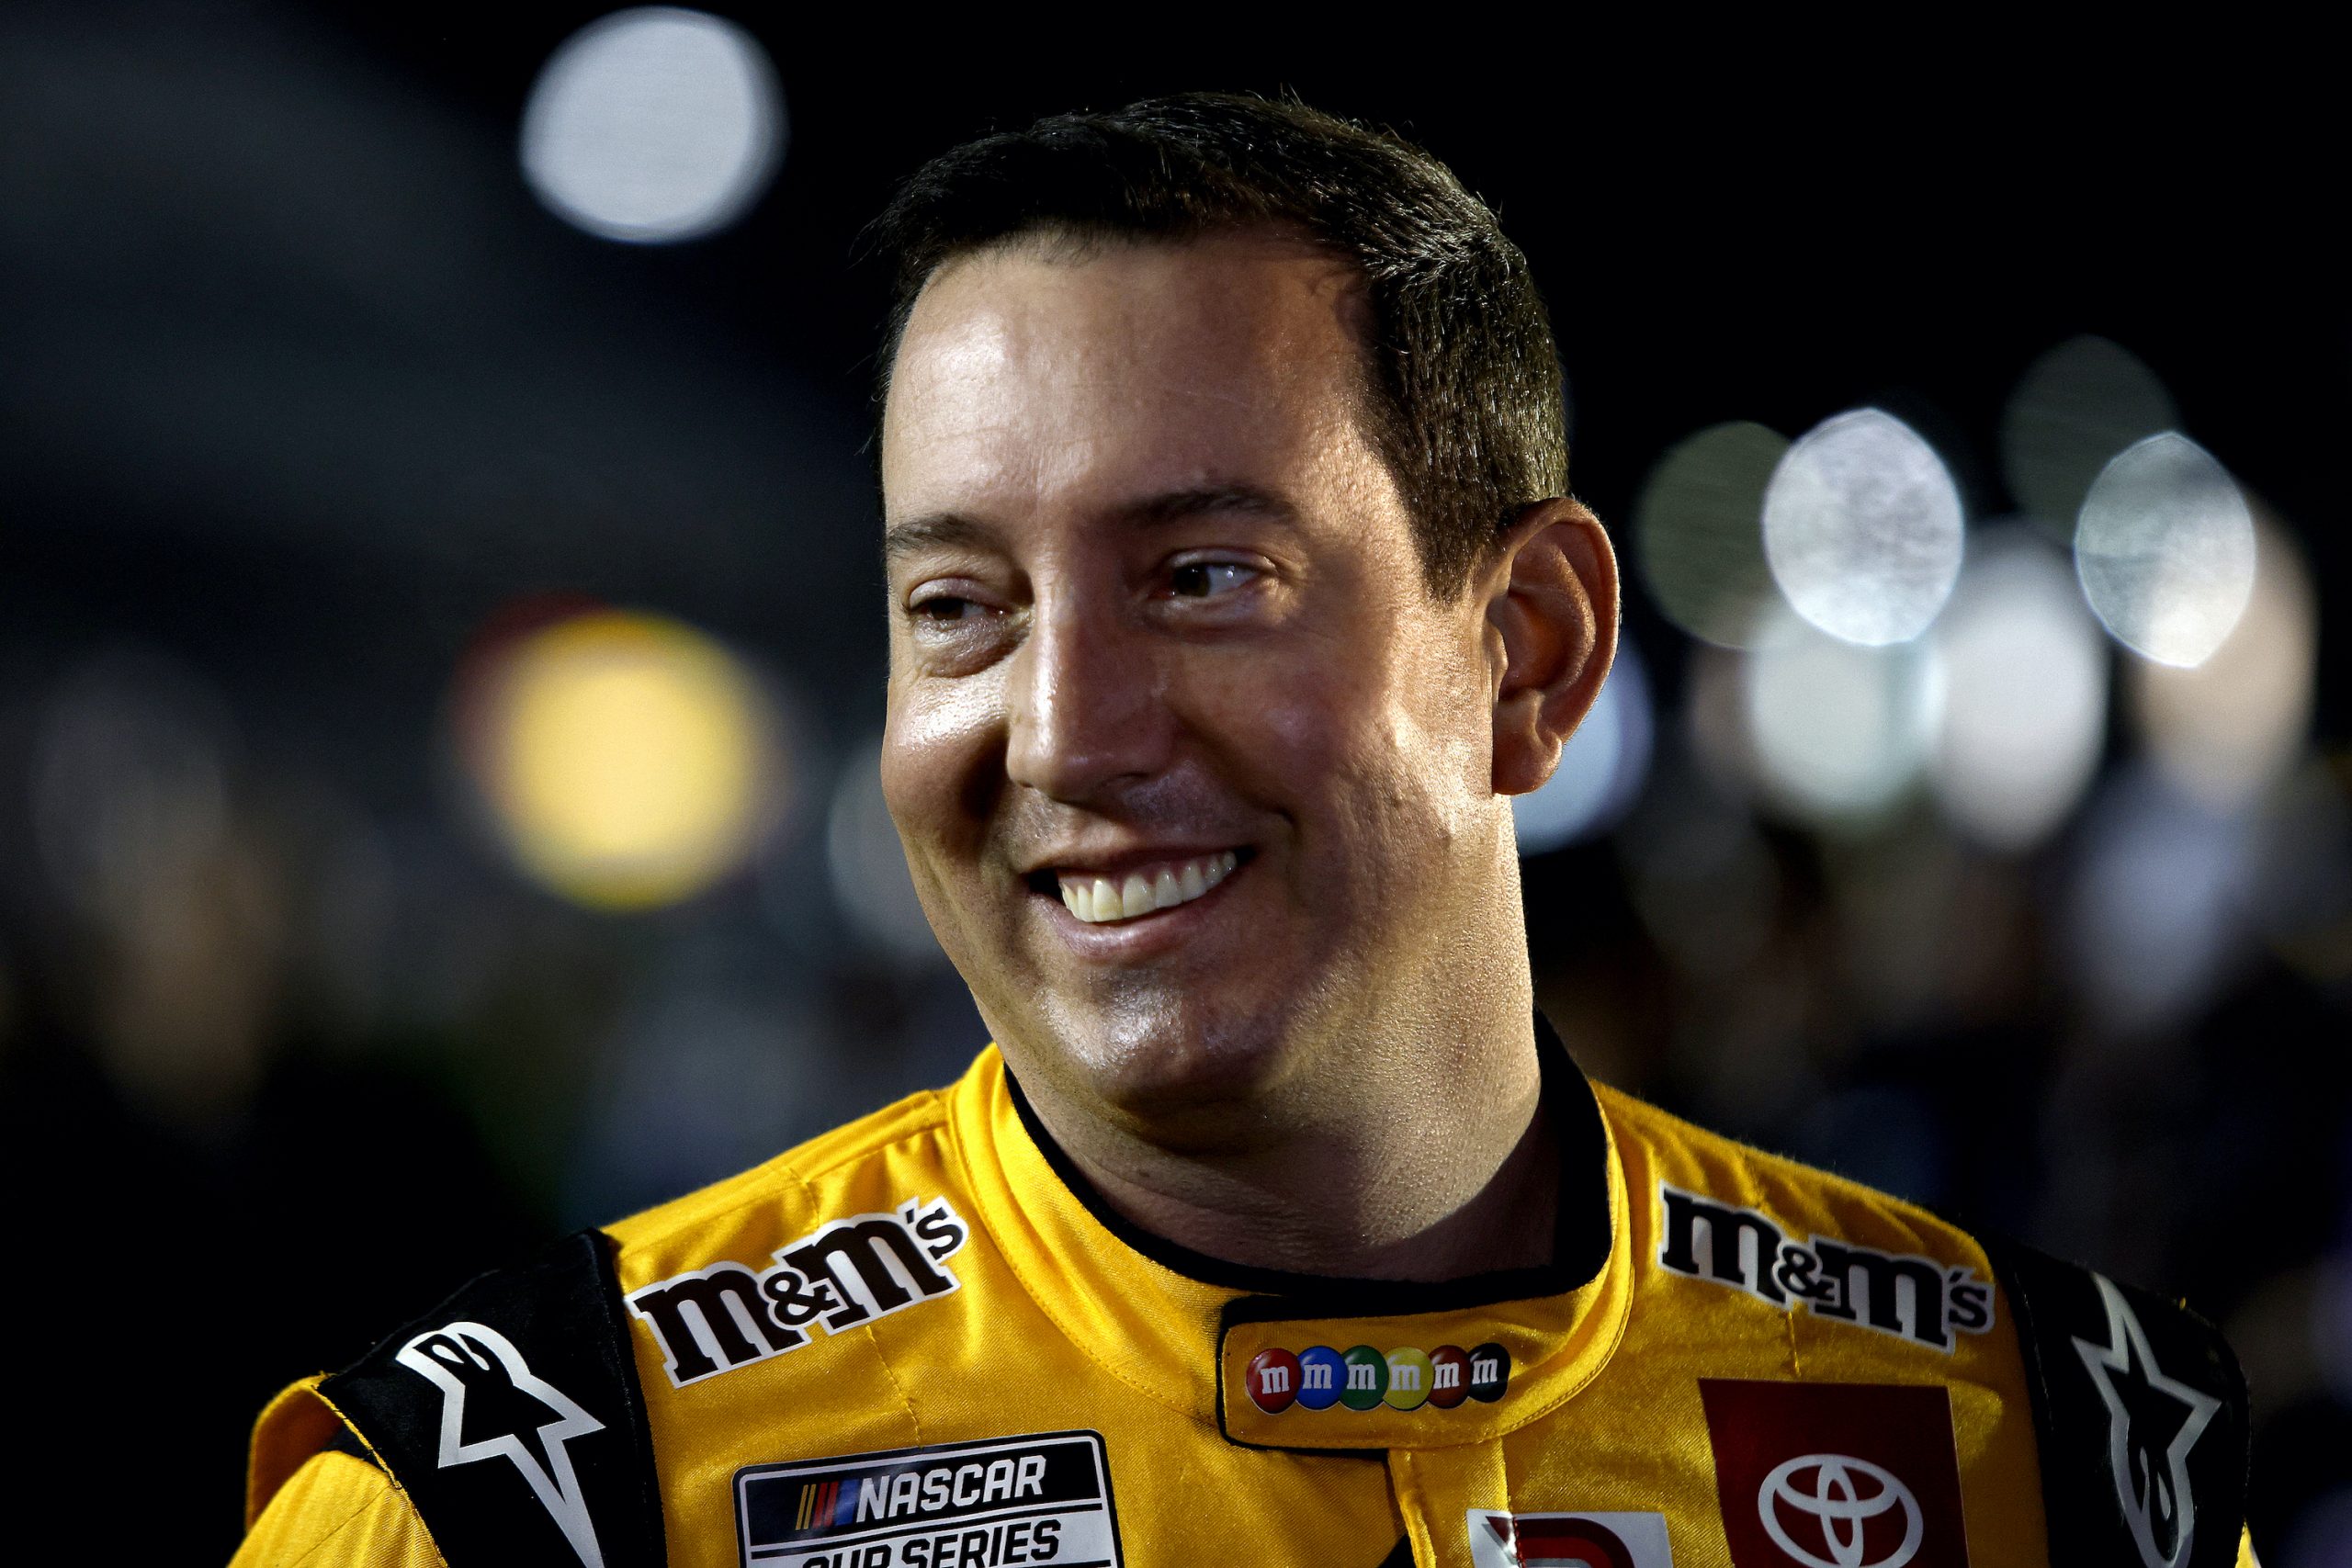 Kyle Busch looks on before qualifying